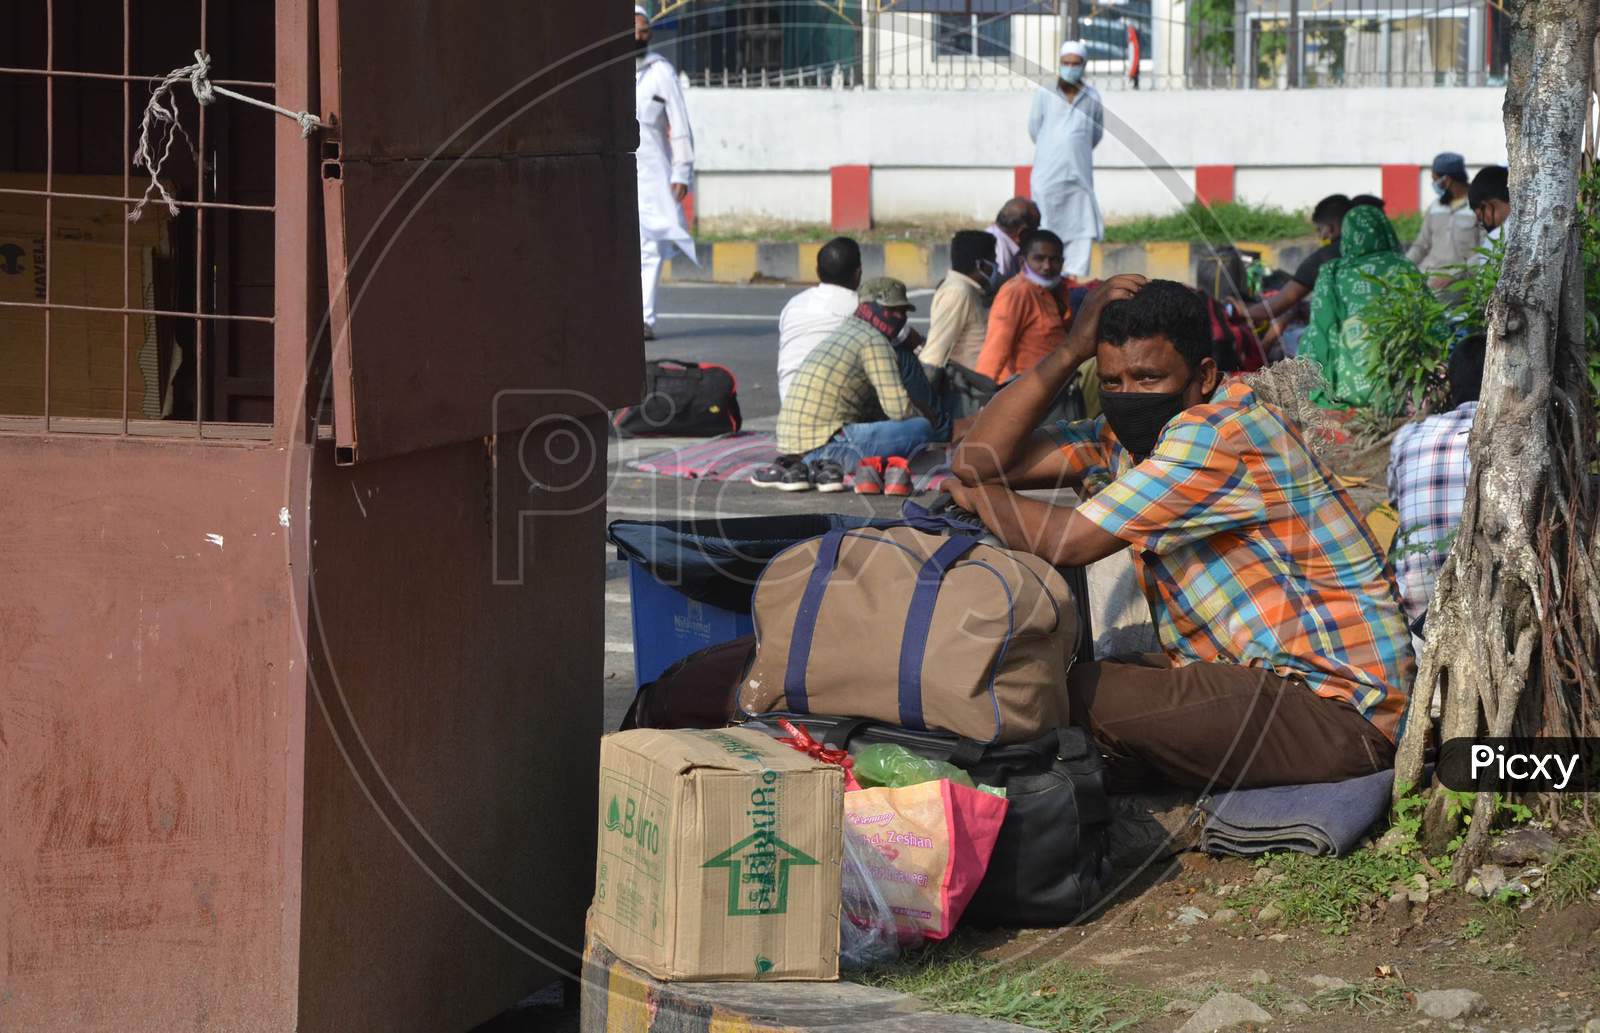 Passengers Wait Outside At Guwahati Railway Station Before Boarding A Special Train To Reach Their Native Places, During Nationwide Lockdown Amidst Coronavirus or COVID-19 Pandemic  In Guwahati District Of Assam,India